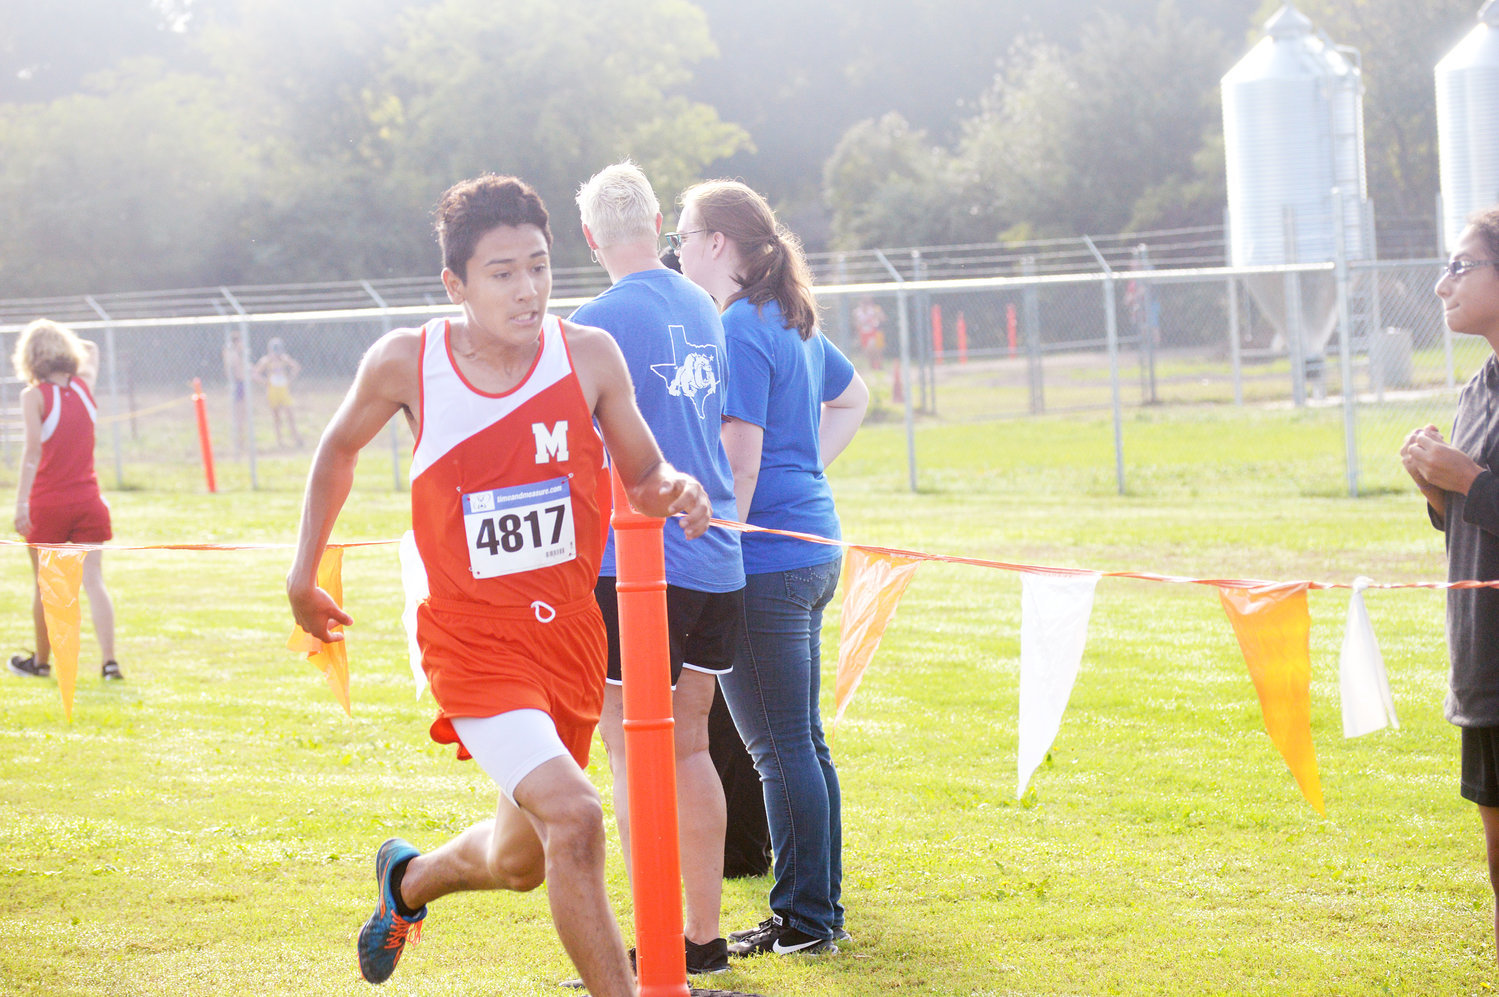 Mineola’s David Amador came in fifth at Saturday’s district cross country meet with a time of 18:28.73.